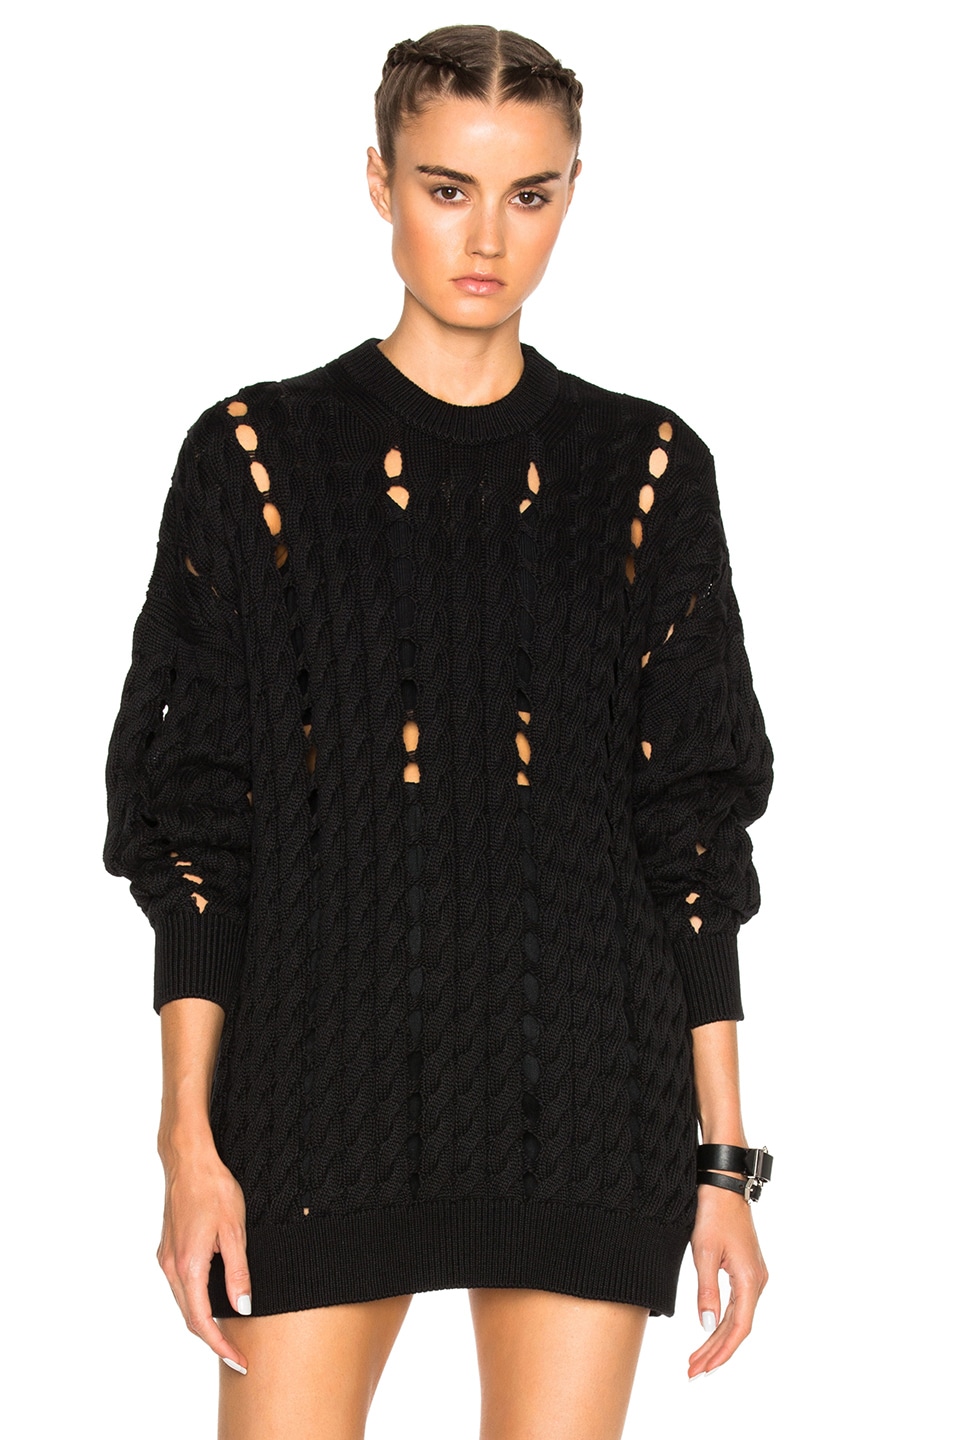 Alexander Wang Cable Knit Crewneck Sweater in Jet | FWRD